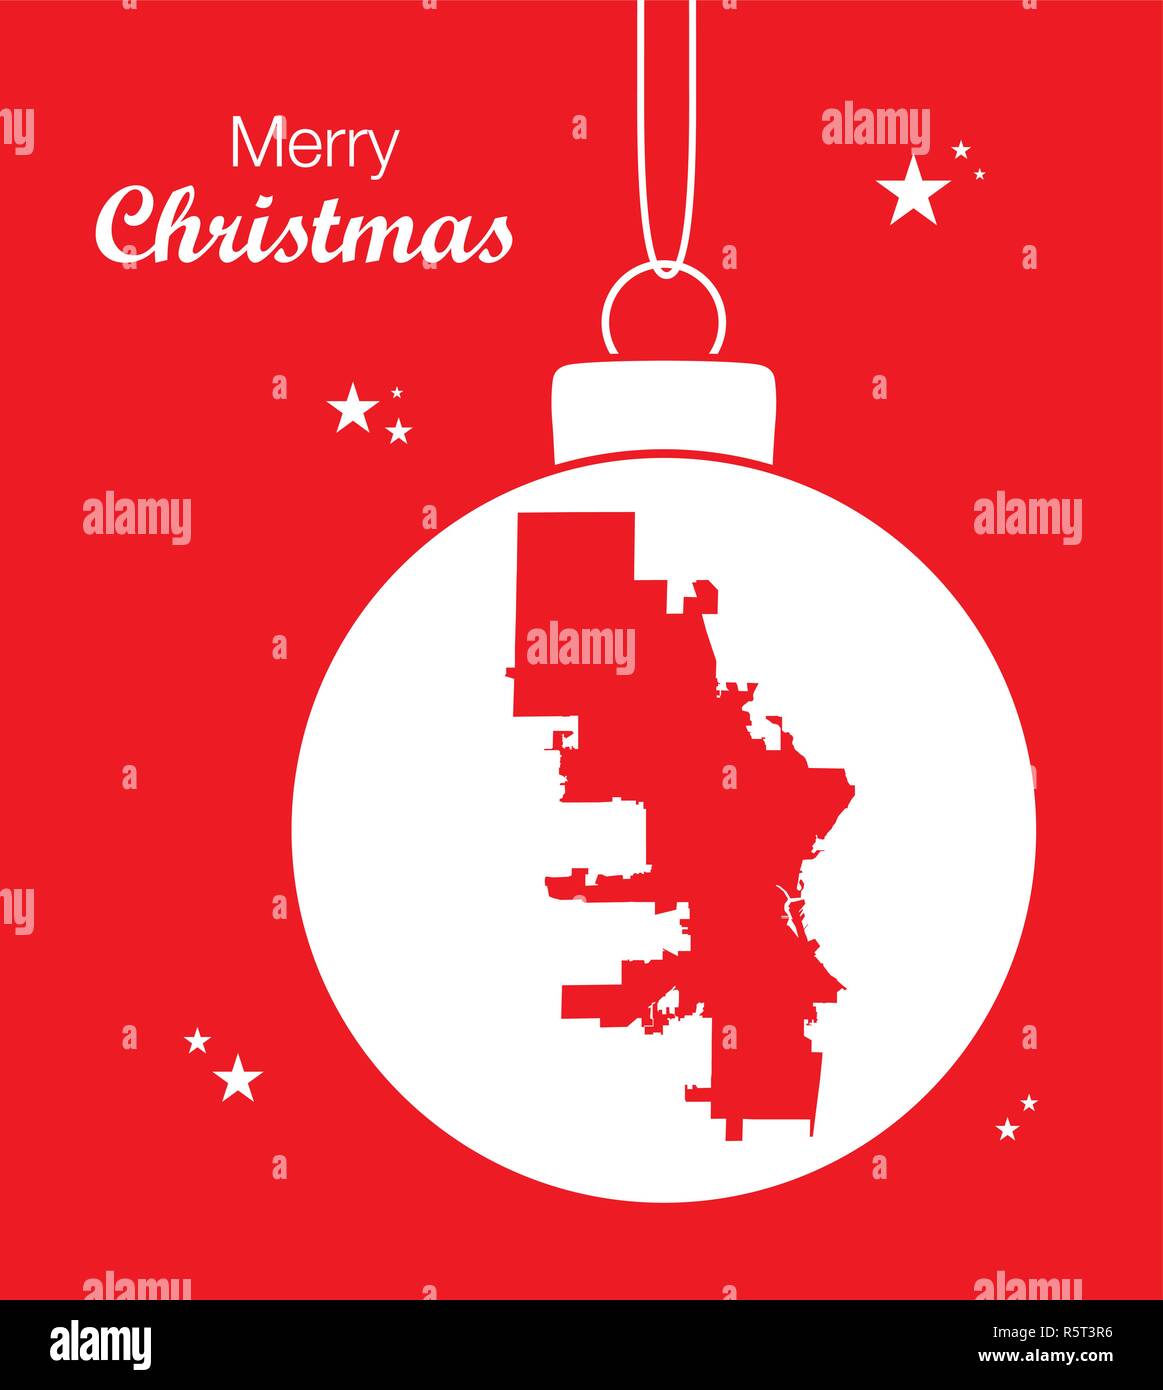 Merry Christmas illustration theme with map of Milwaukee Wisconsin Stock Vector